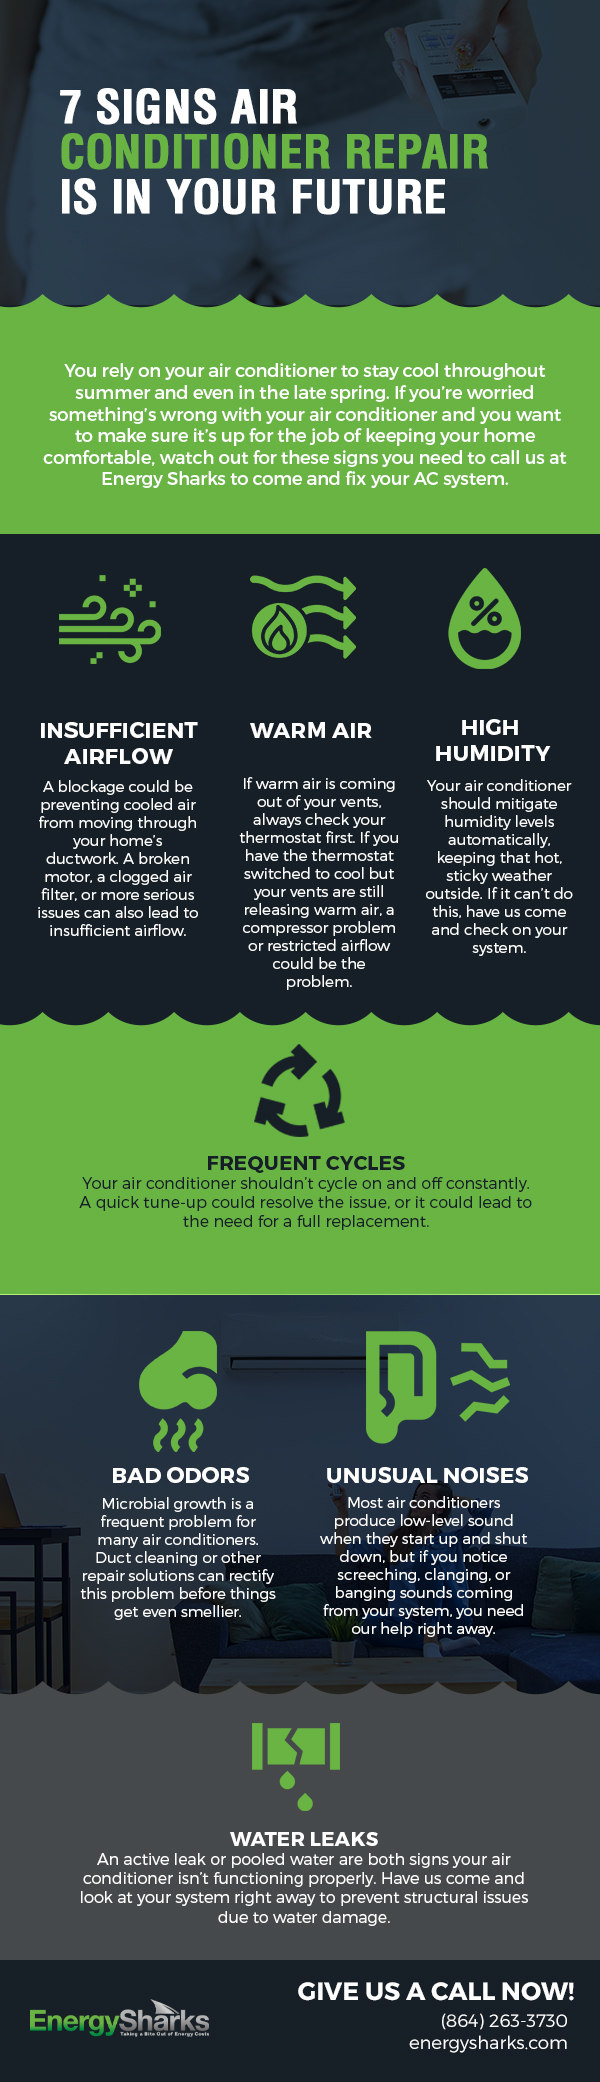 7 Signs Air Conditioner Repair is in Your Future [infographic]